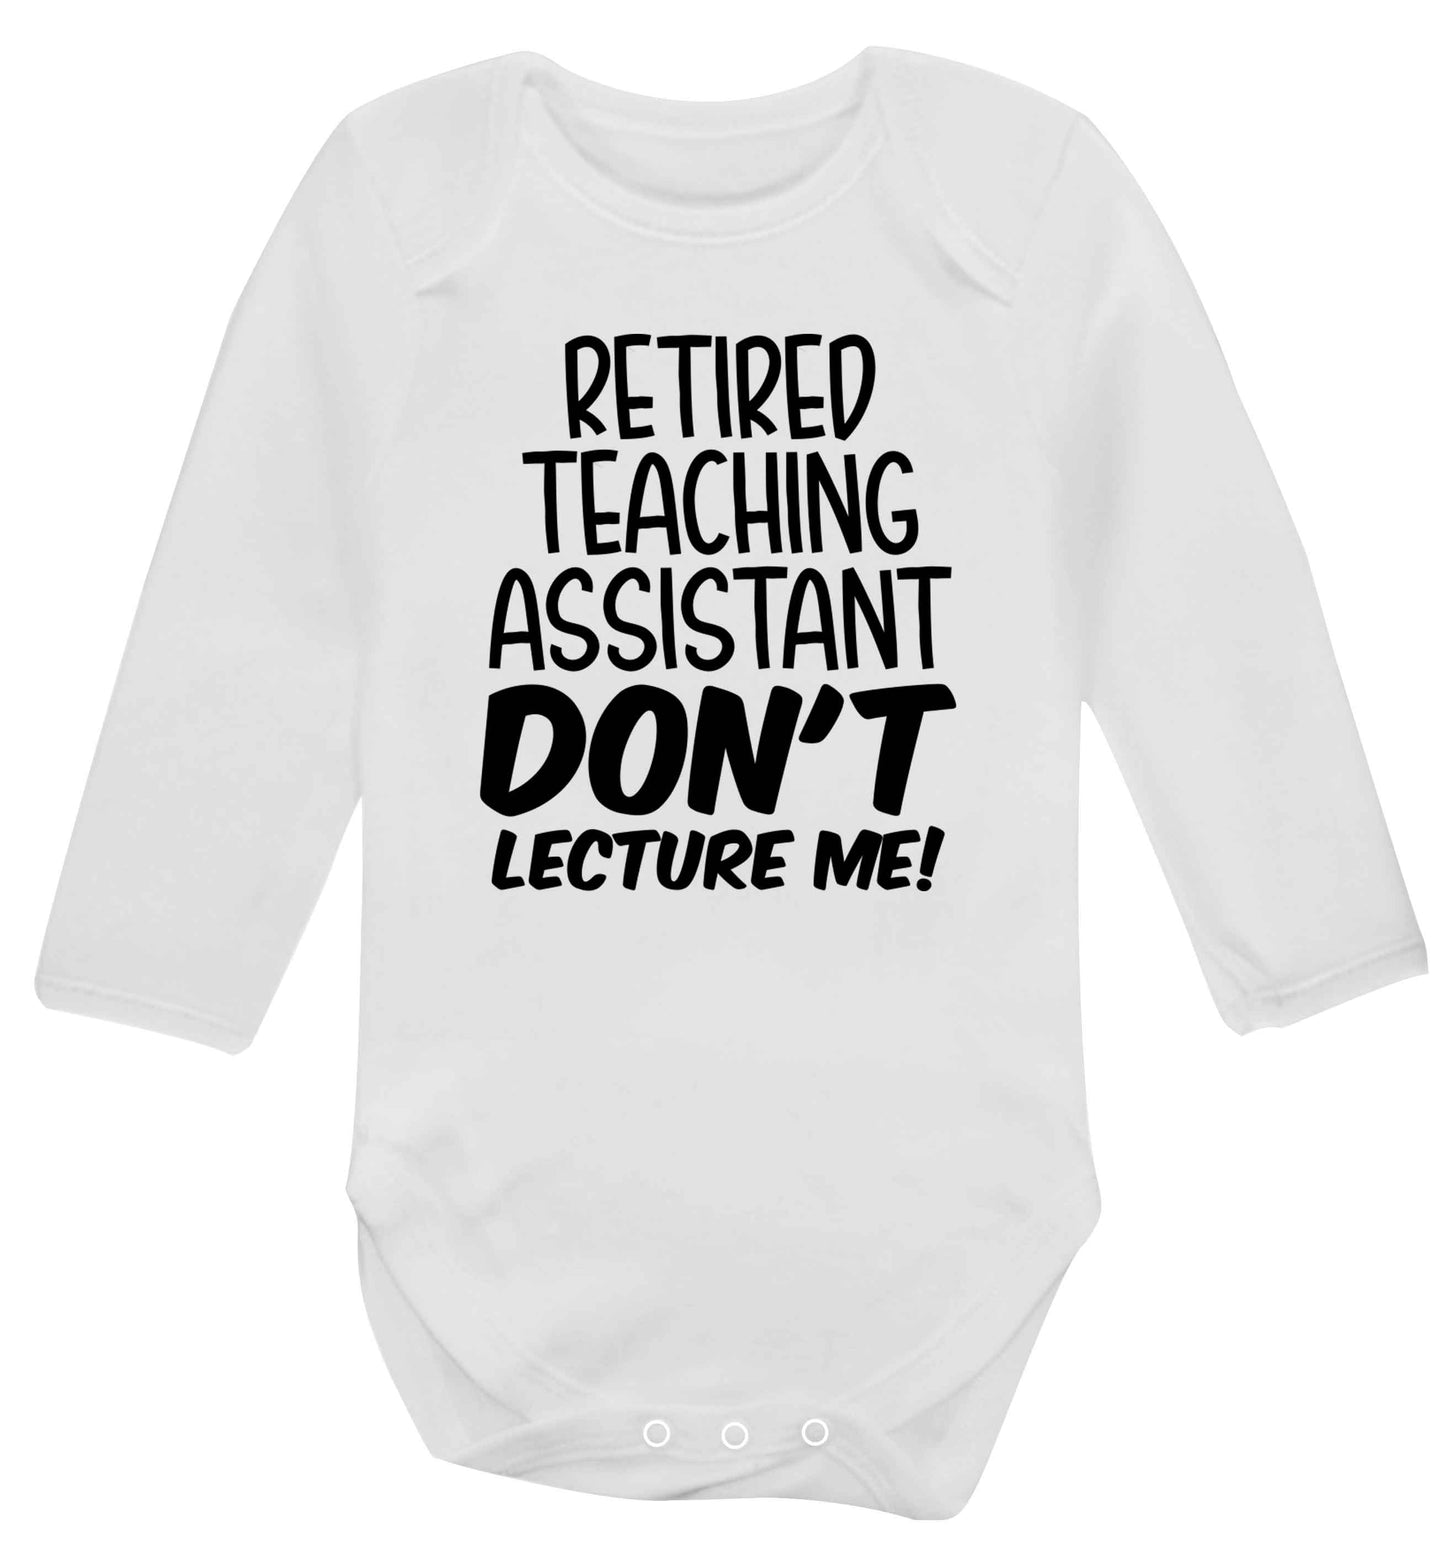 Retired teaching assistant don't lecture me Baby Vest long sleeved white 6-12 months